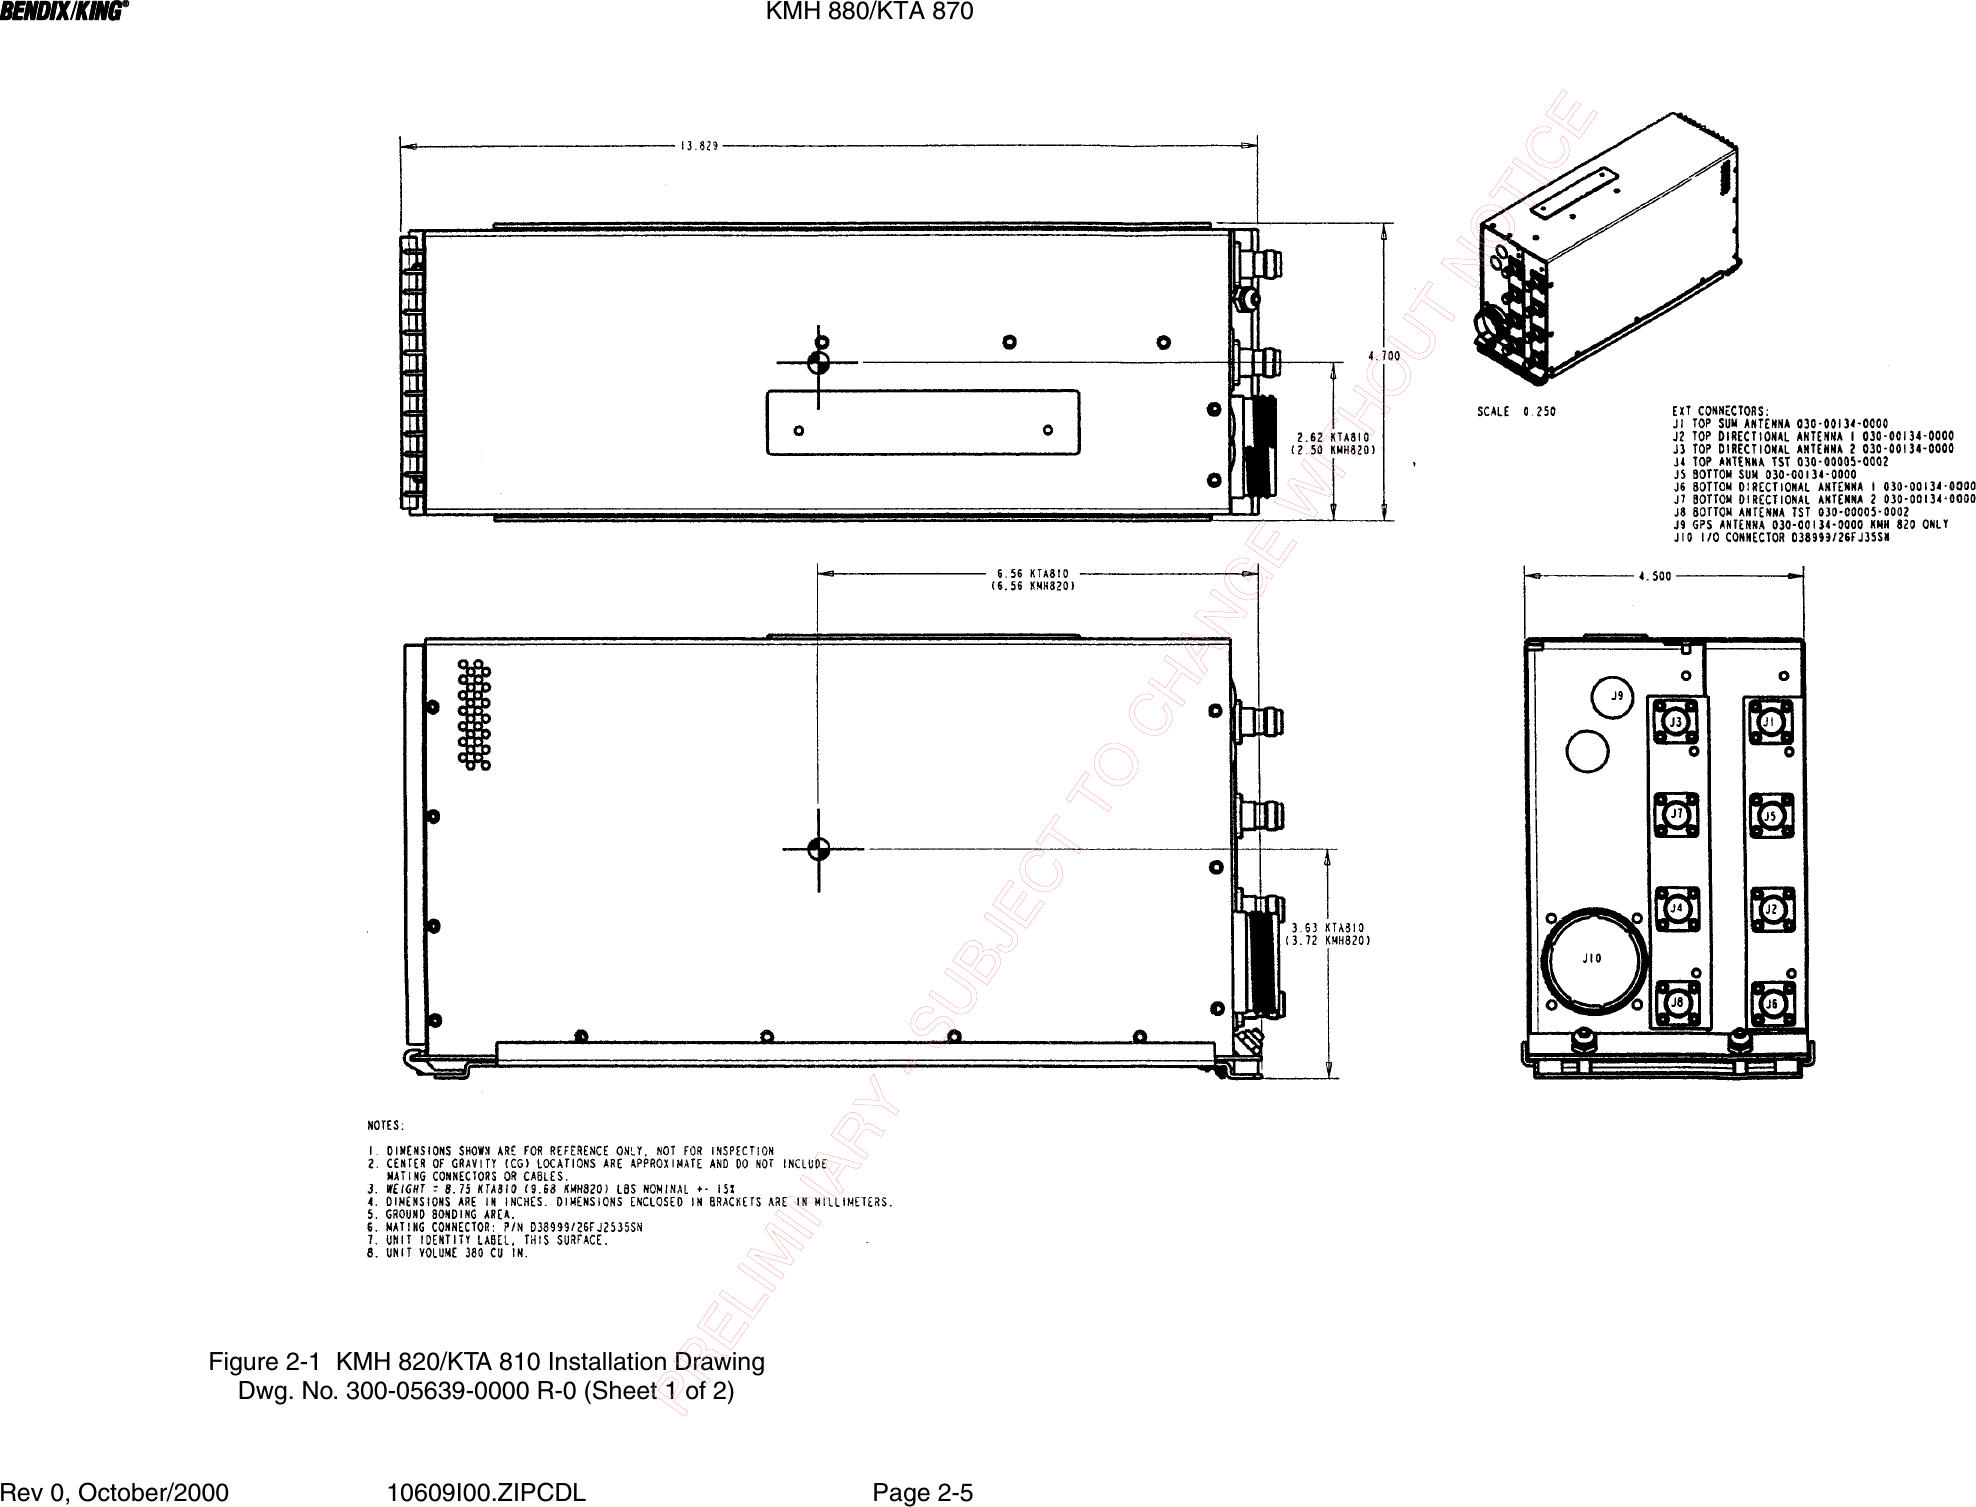 BBBBKMH 880/KTA 870Rev 0, October/2000 10609I00.ZIPCDL Page 2-5Figure 2-1  KMH 820/KTA 810 Installation DrawingDwg. No. 300-05639-0000 R-0 (Sheet 1 of 2)PRELIMINARY - SUBJECT TO CHANGE WITHOUT NOTICE